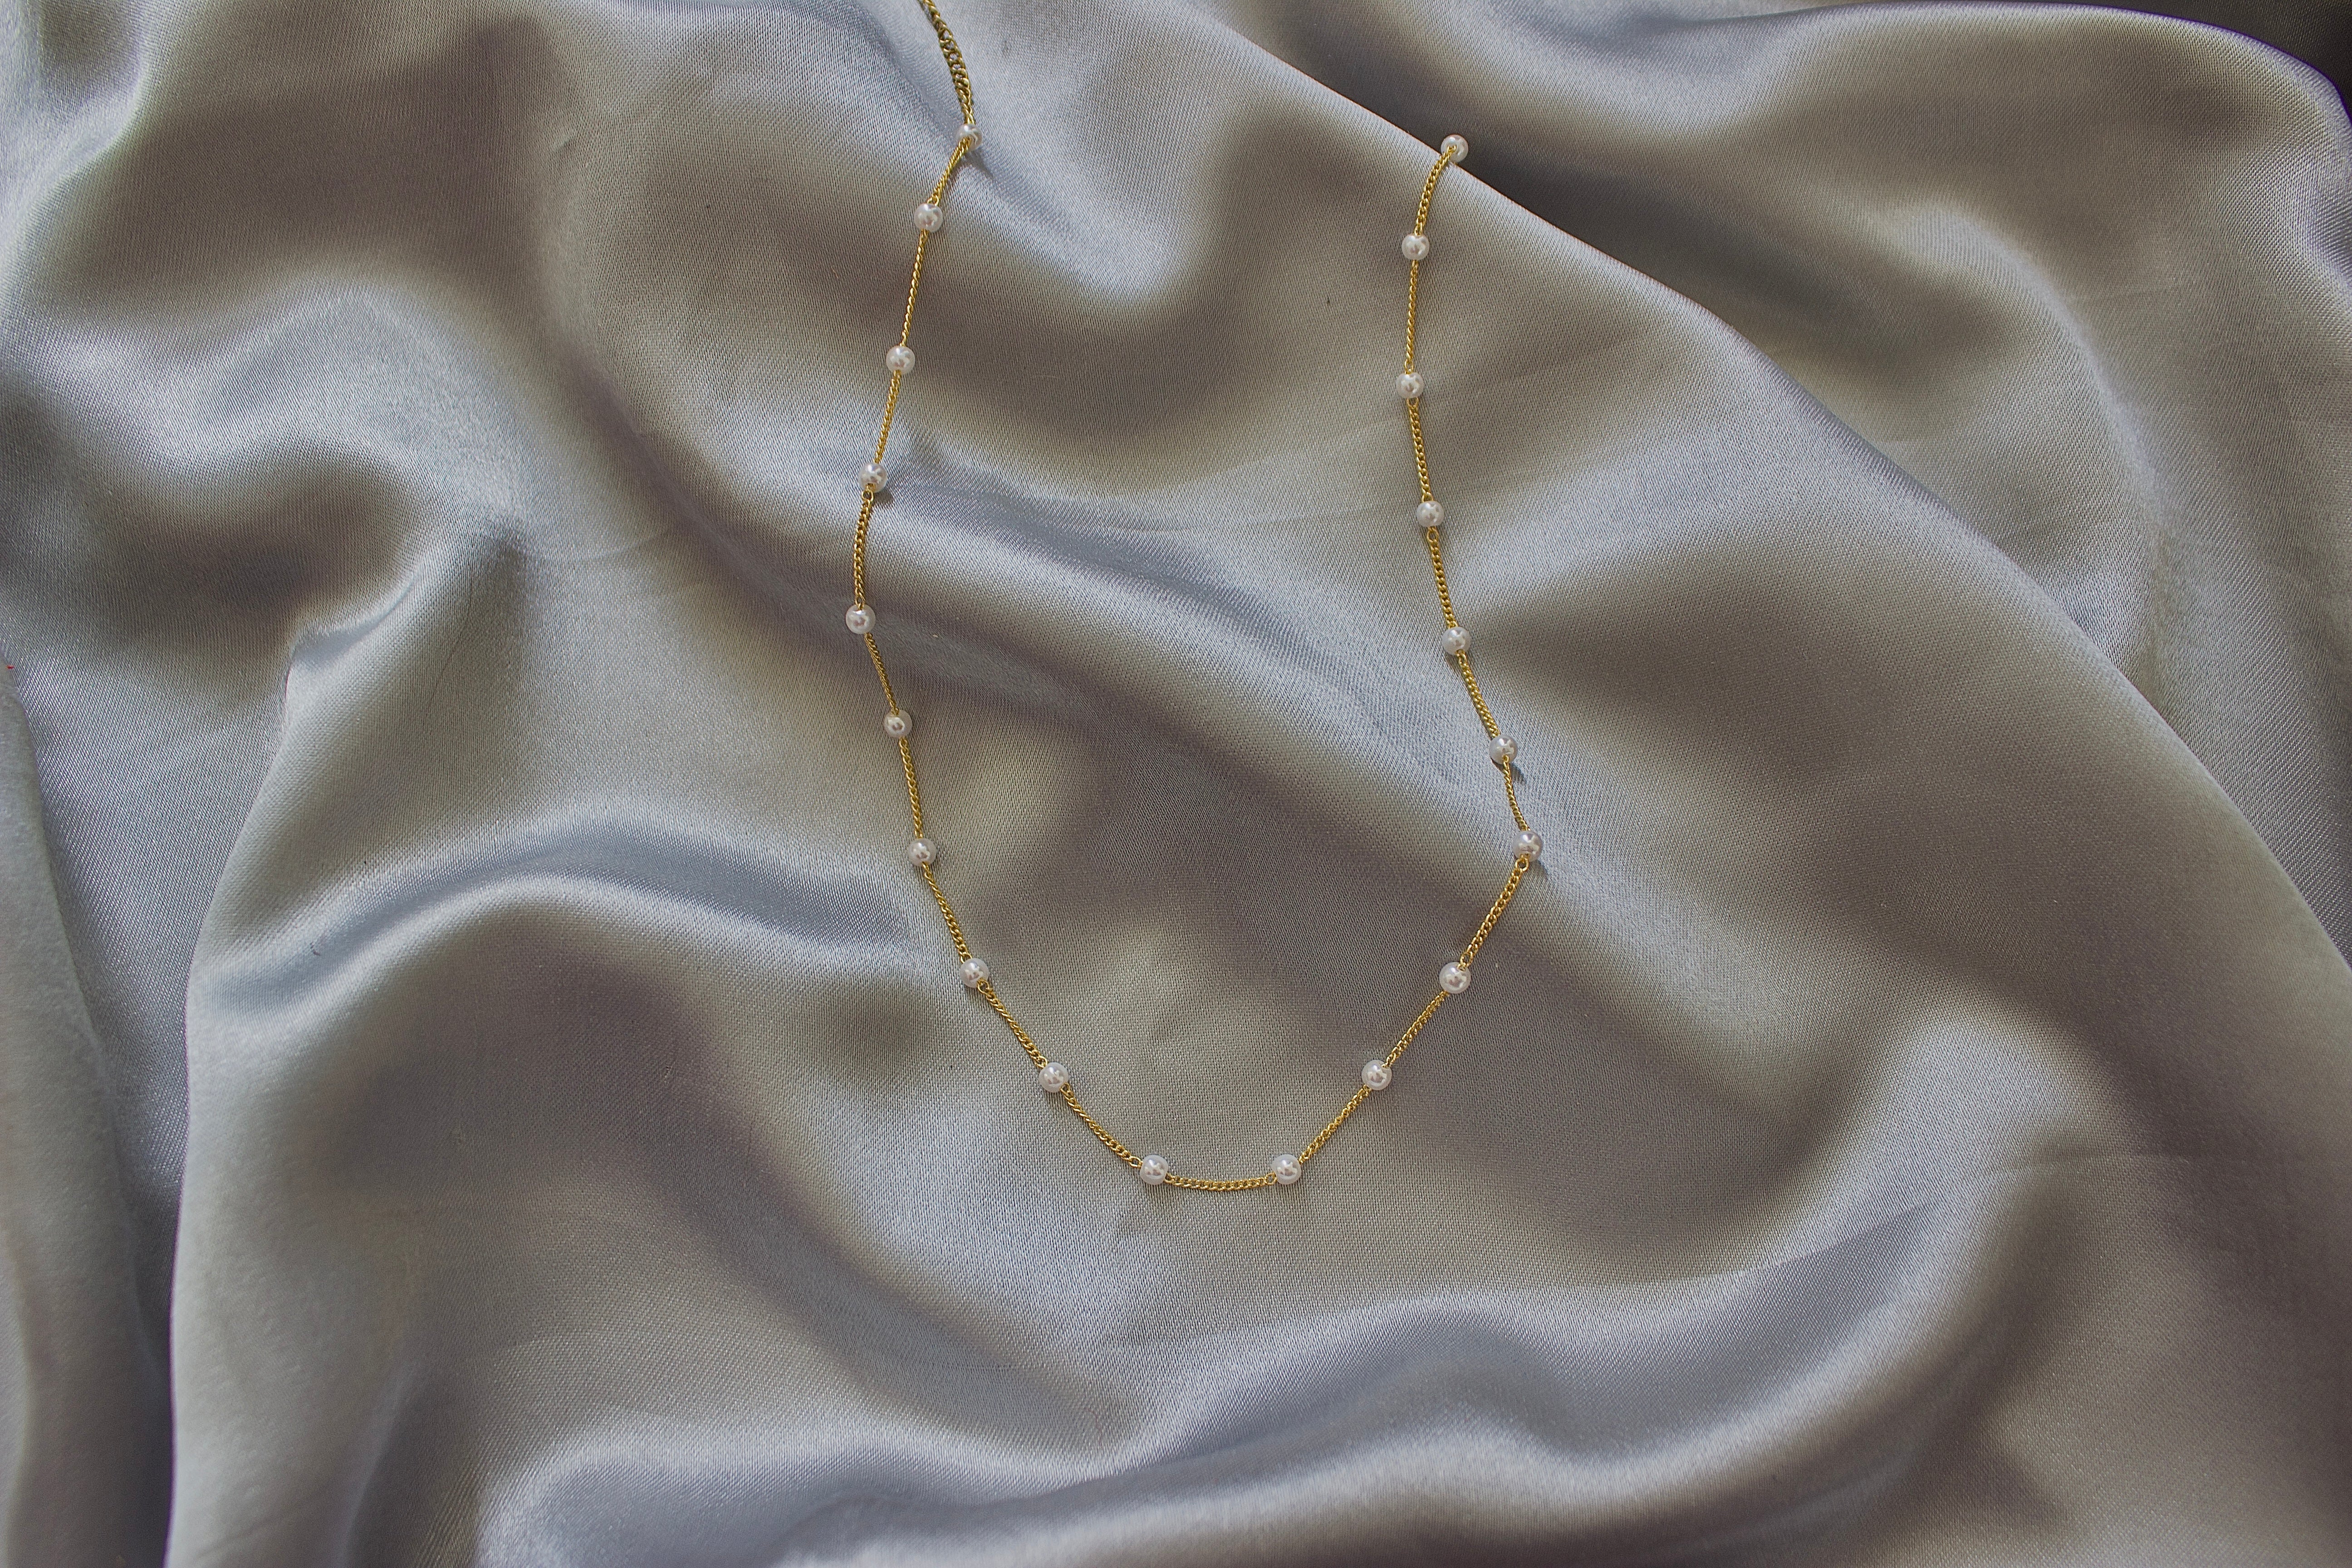 Spaced out pearl necklace